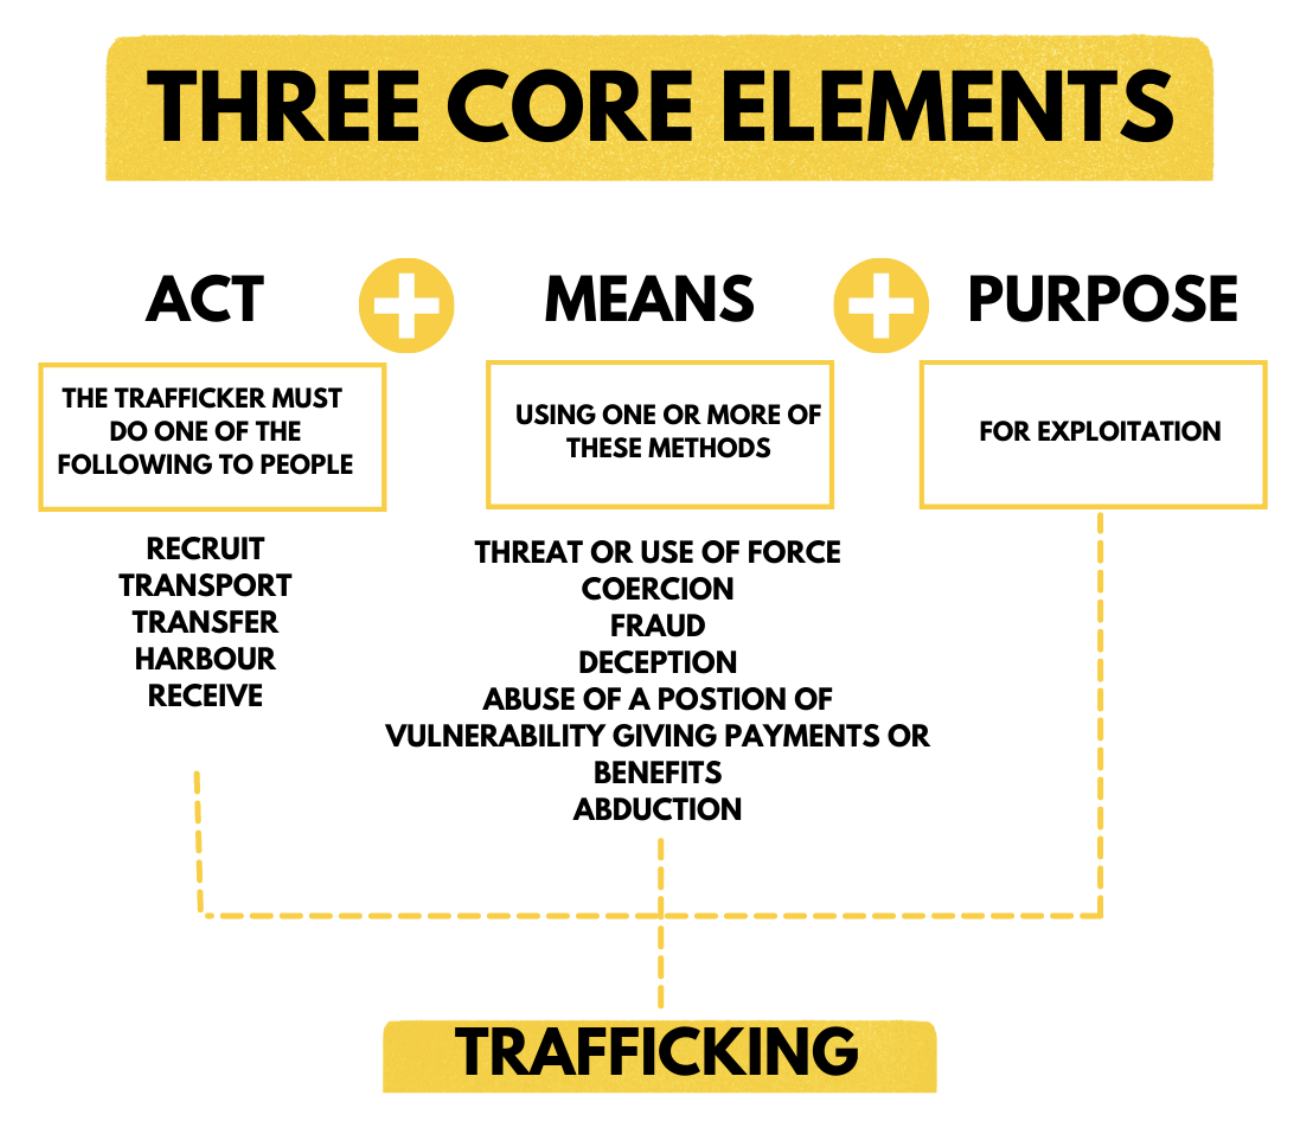 Diagram showing 'three core elements' of what defines human trafficking. (1) Acts: the trafficker must do one of the following to people; recruit, transport, transfer, harbour, receive. (2) Means: using one or more of these methods; threat or us of force, coercion, fraud, deception, abuse of a positionof vulnerability, giving payments or benefits, abduction. (3) Purpose: for exploitation. 